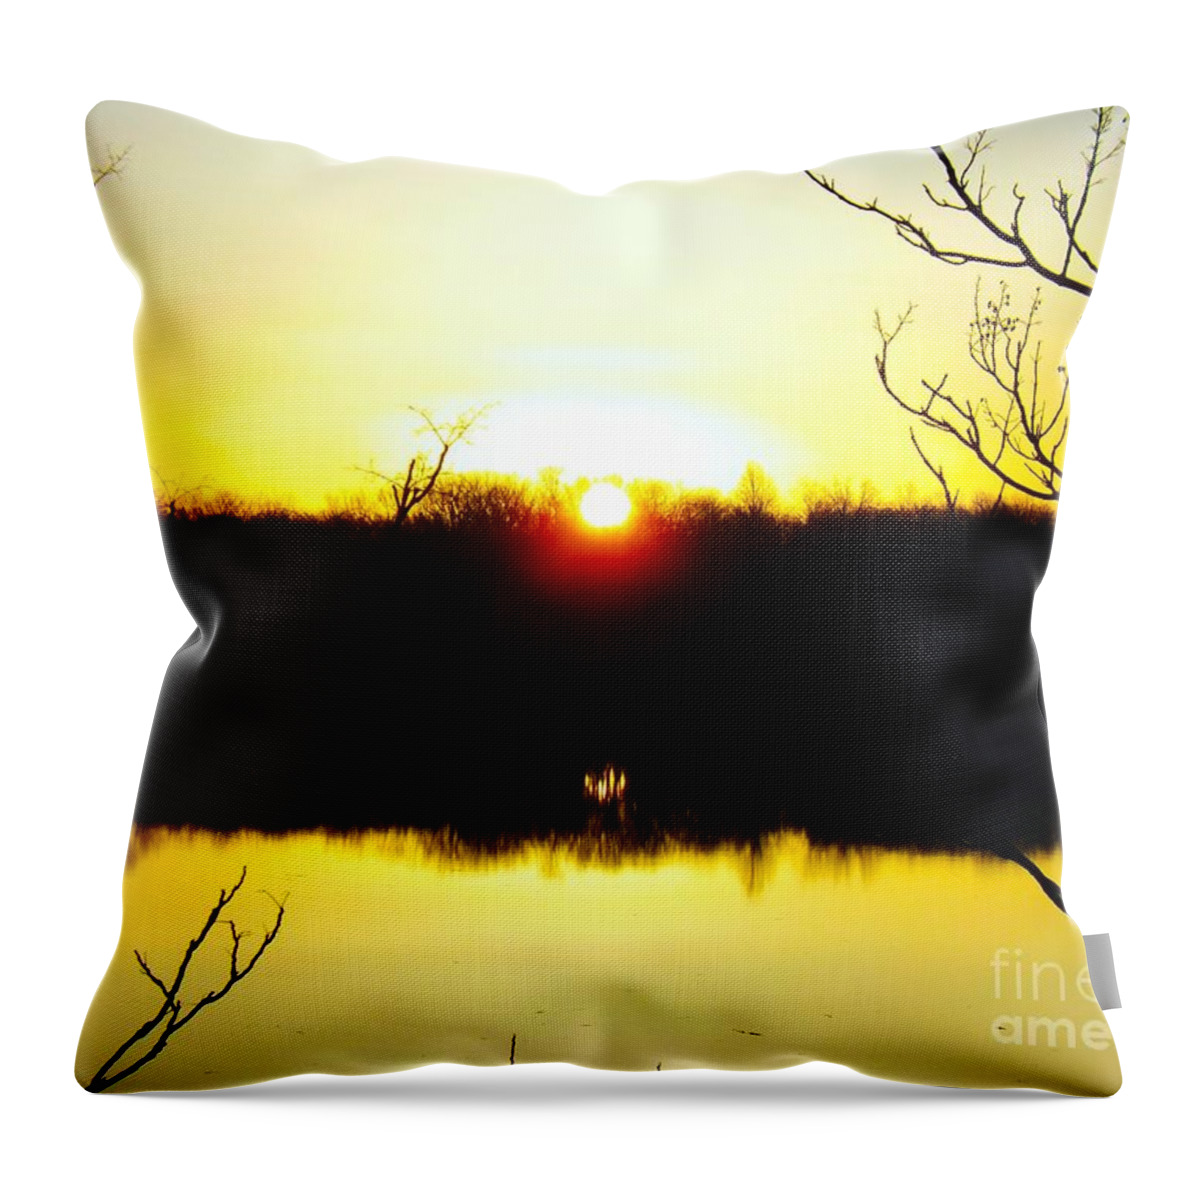 Rising Sun Throw Pillow featuring the photograph Rising Sun On The Delaware River by Robyn King